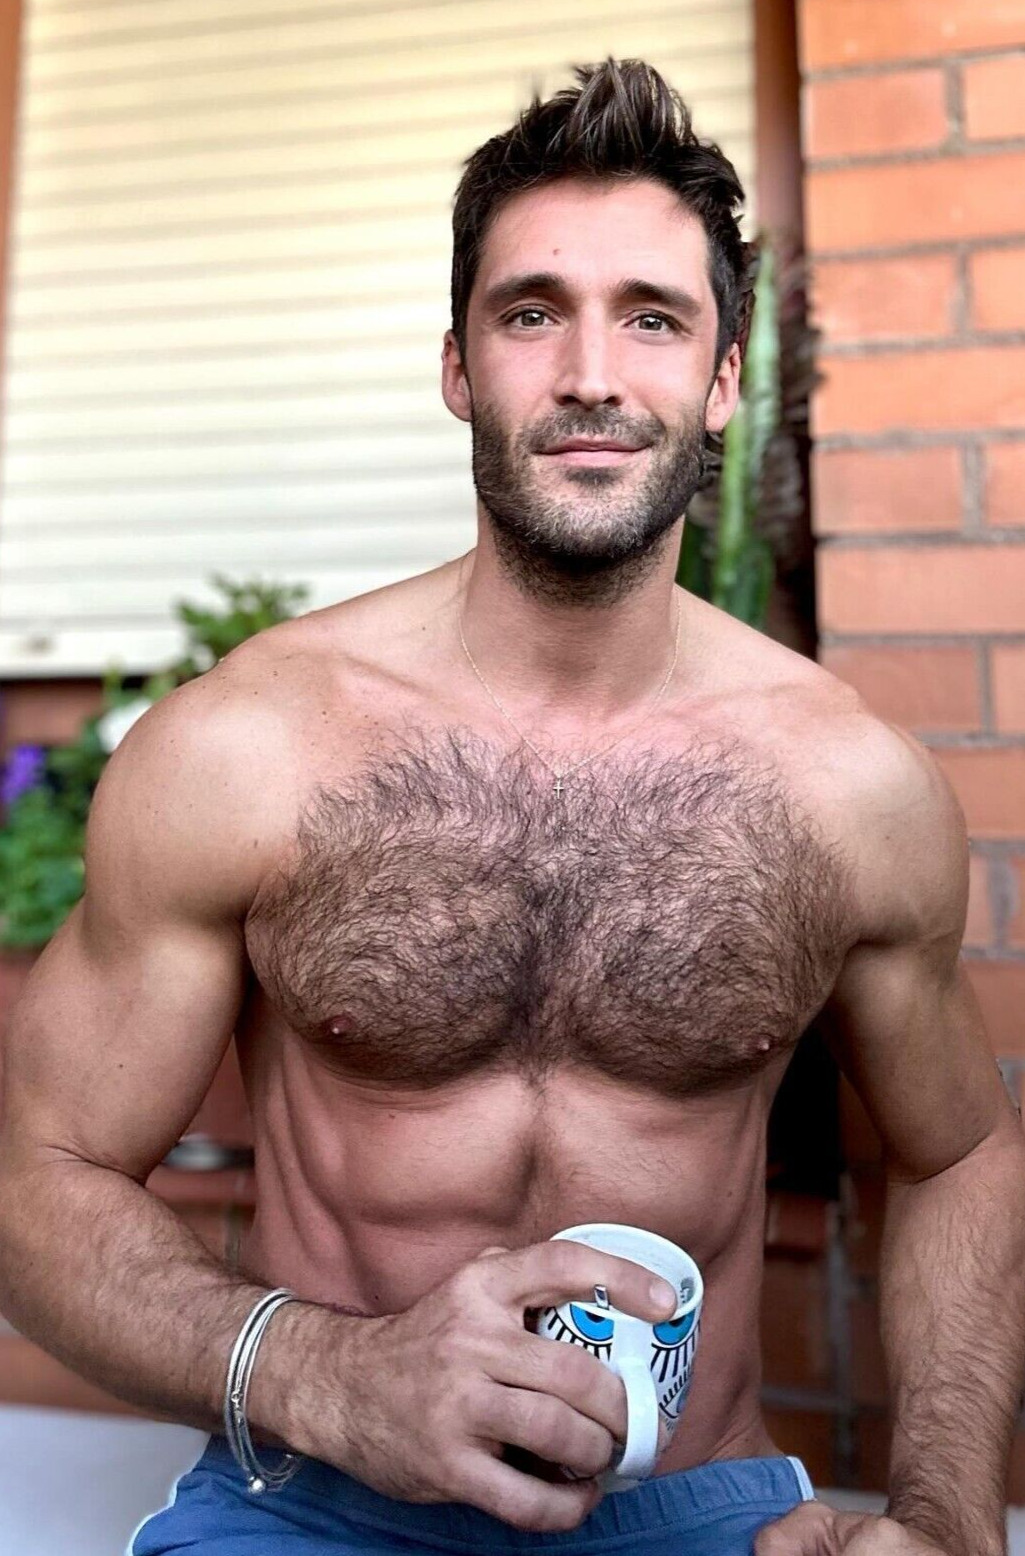 Shirtless Male Hairy Chest Bearded Muscular Man Handsome Beefcake PHOTO 4X6 H424